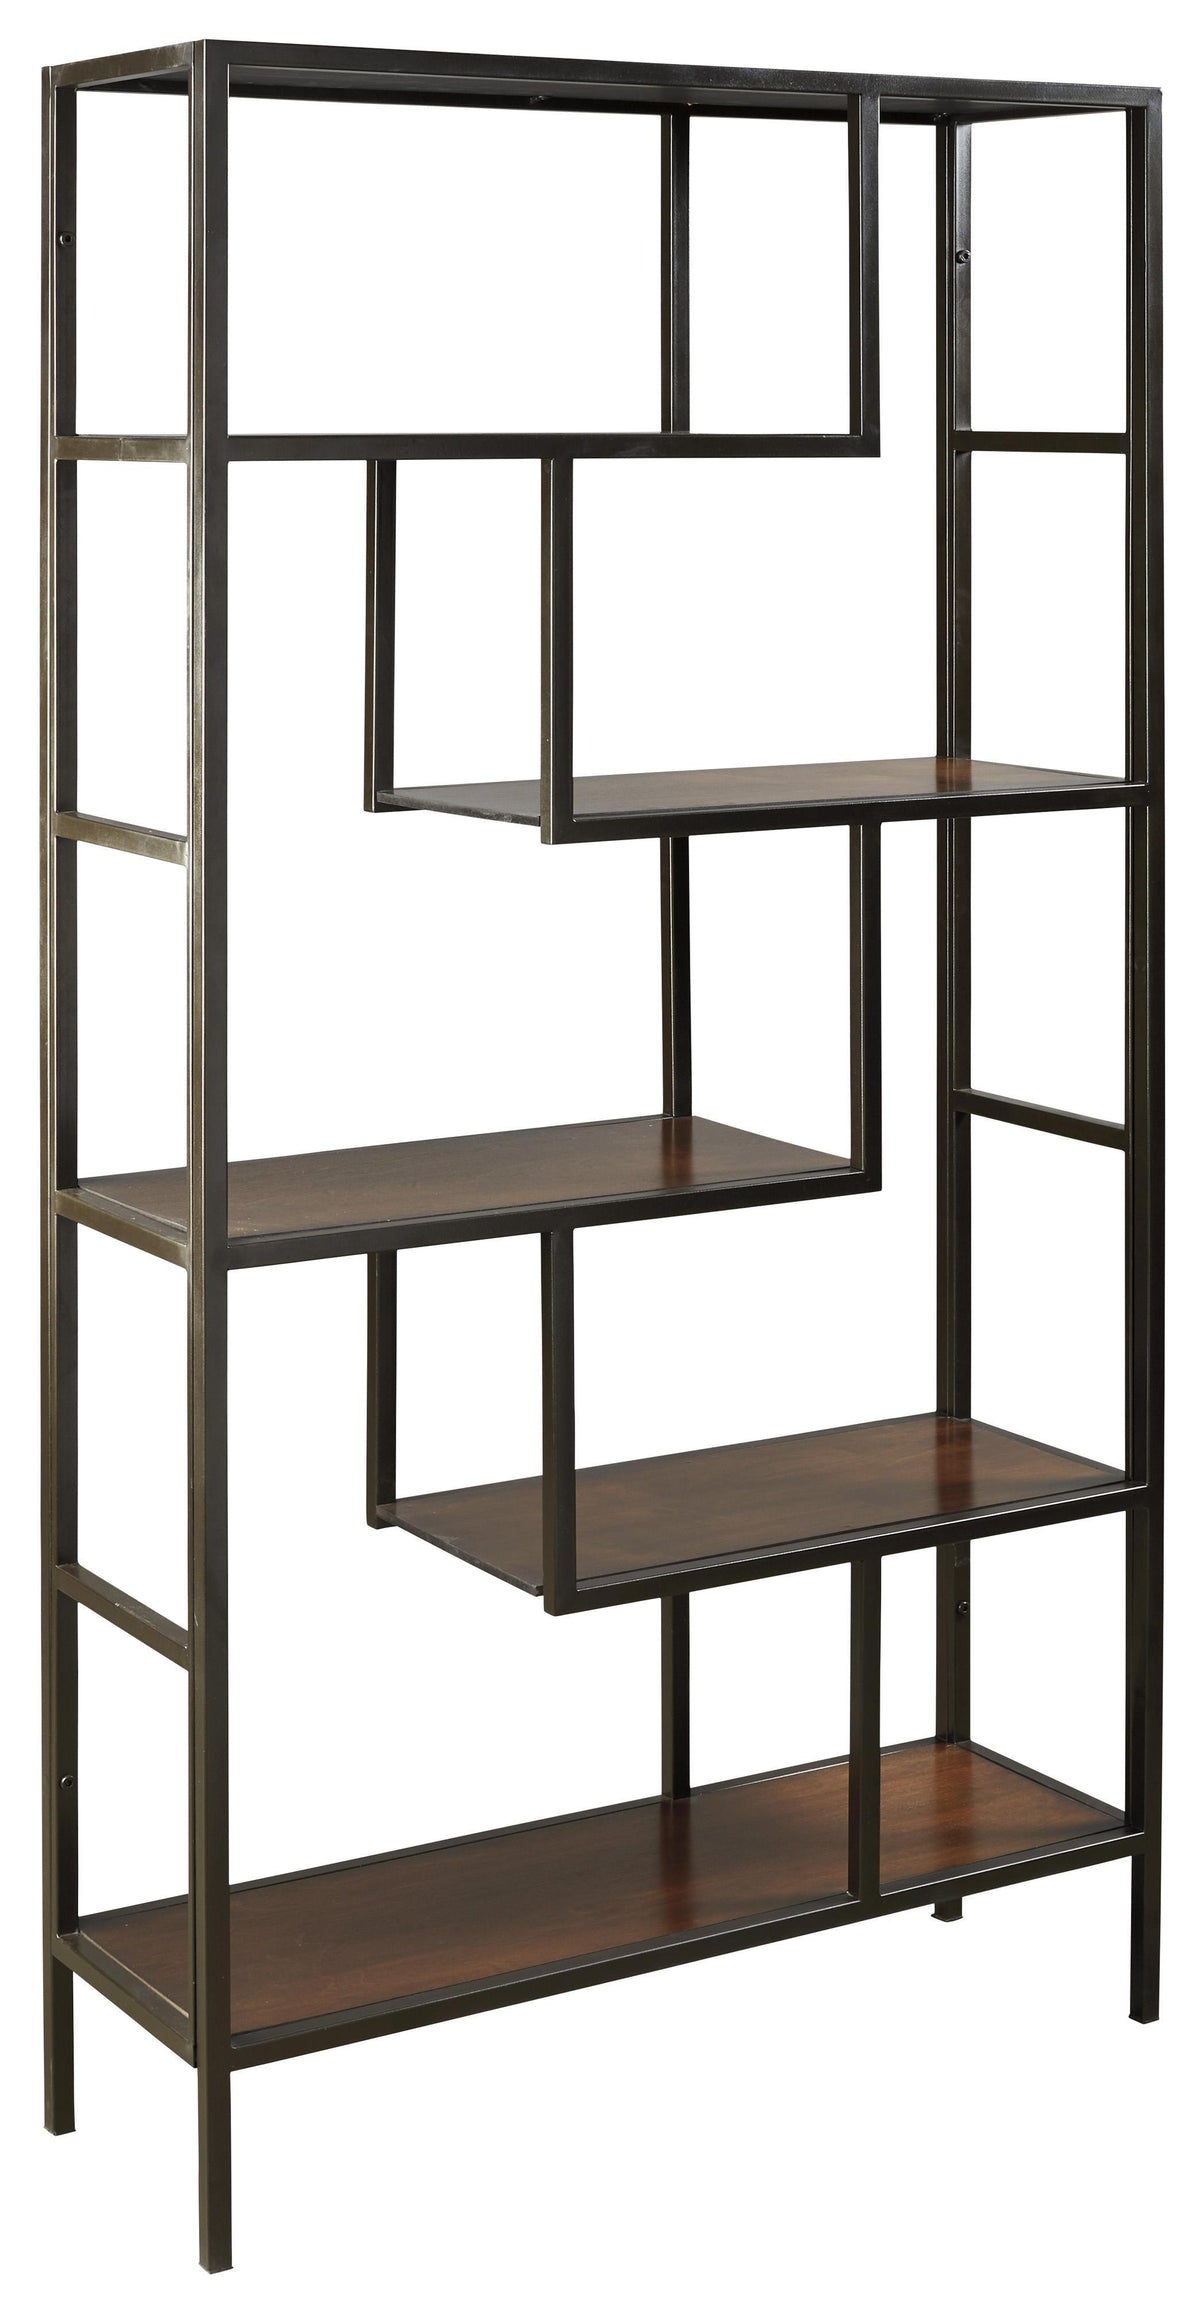 5 Shelves Asymmetric Design Bookcase with Metal Frame in Brown and Black - BM210649